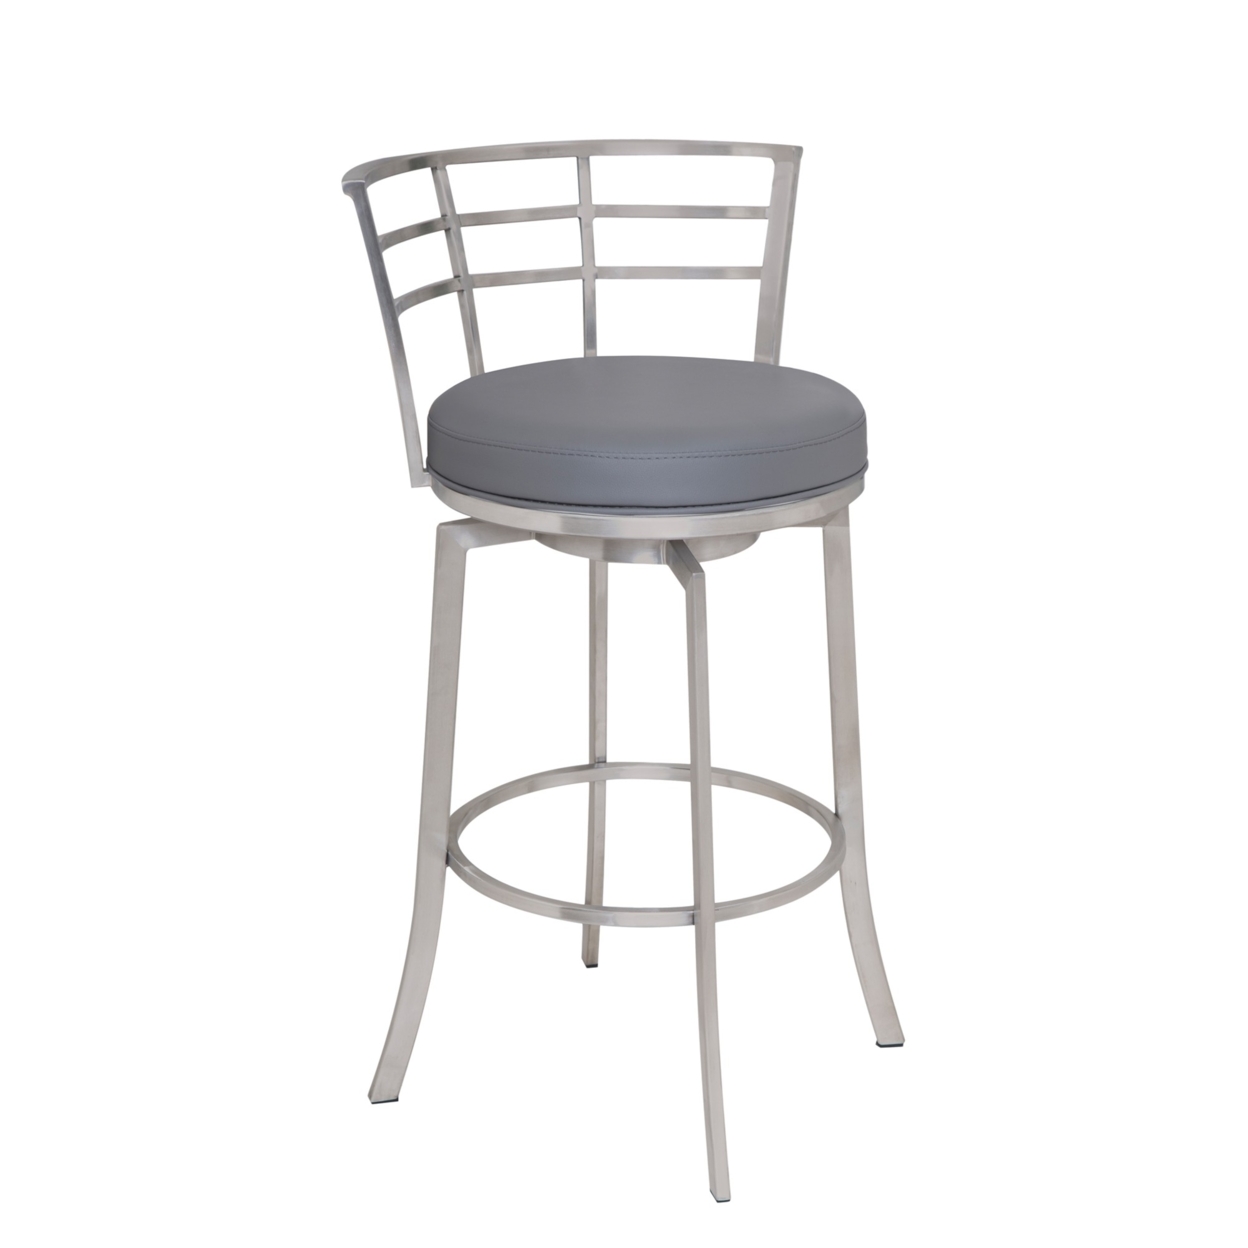 30 Inch Curved Back Counter Height Barstool With Metal Flared Legs, Silver- Saltoro Sherpi